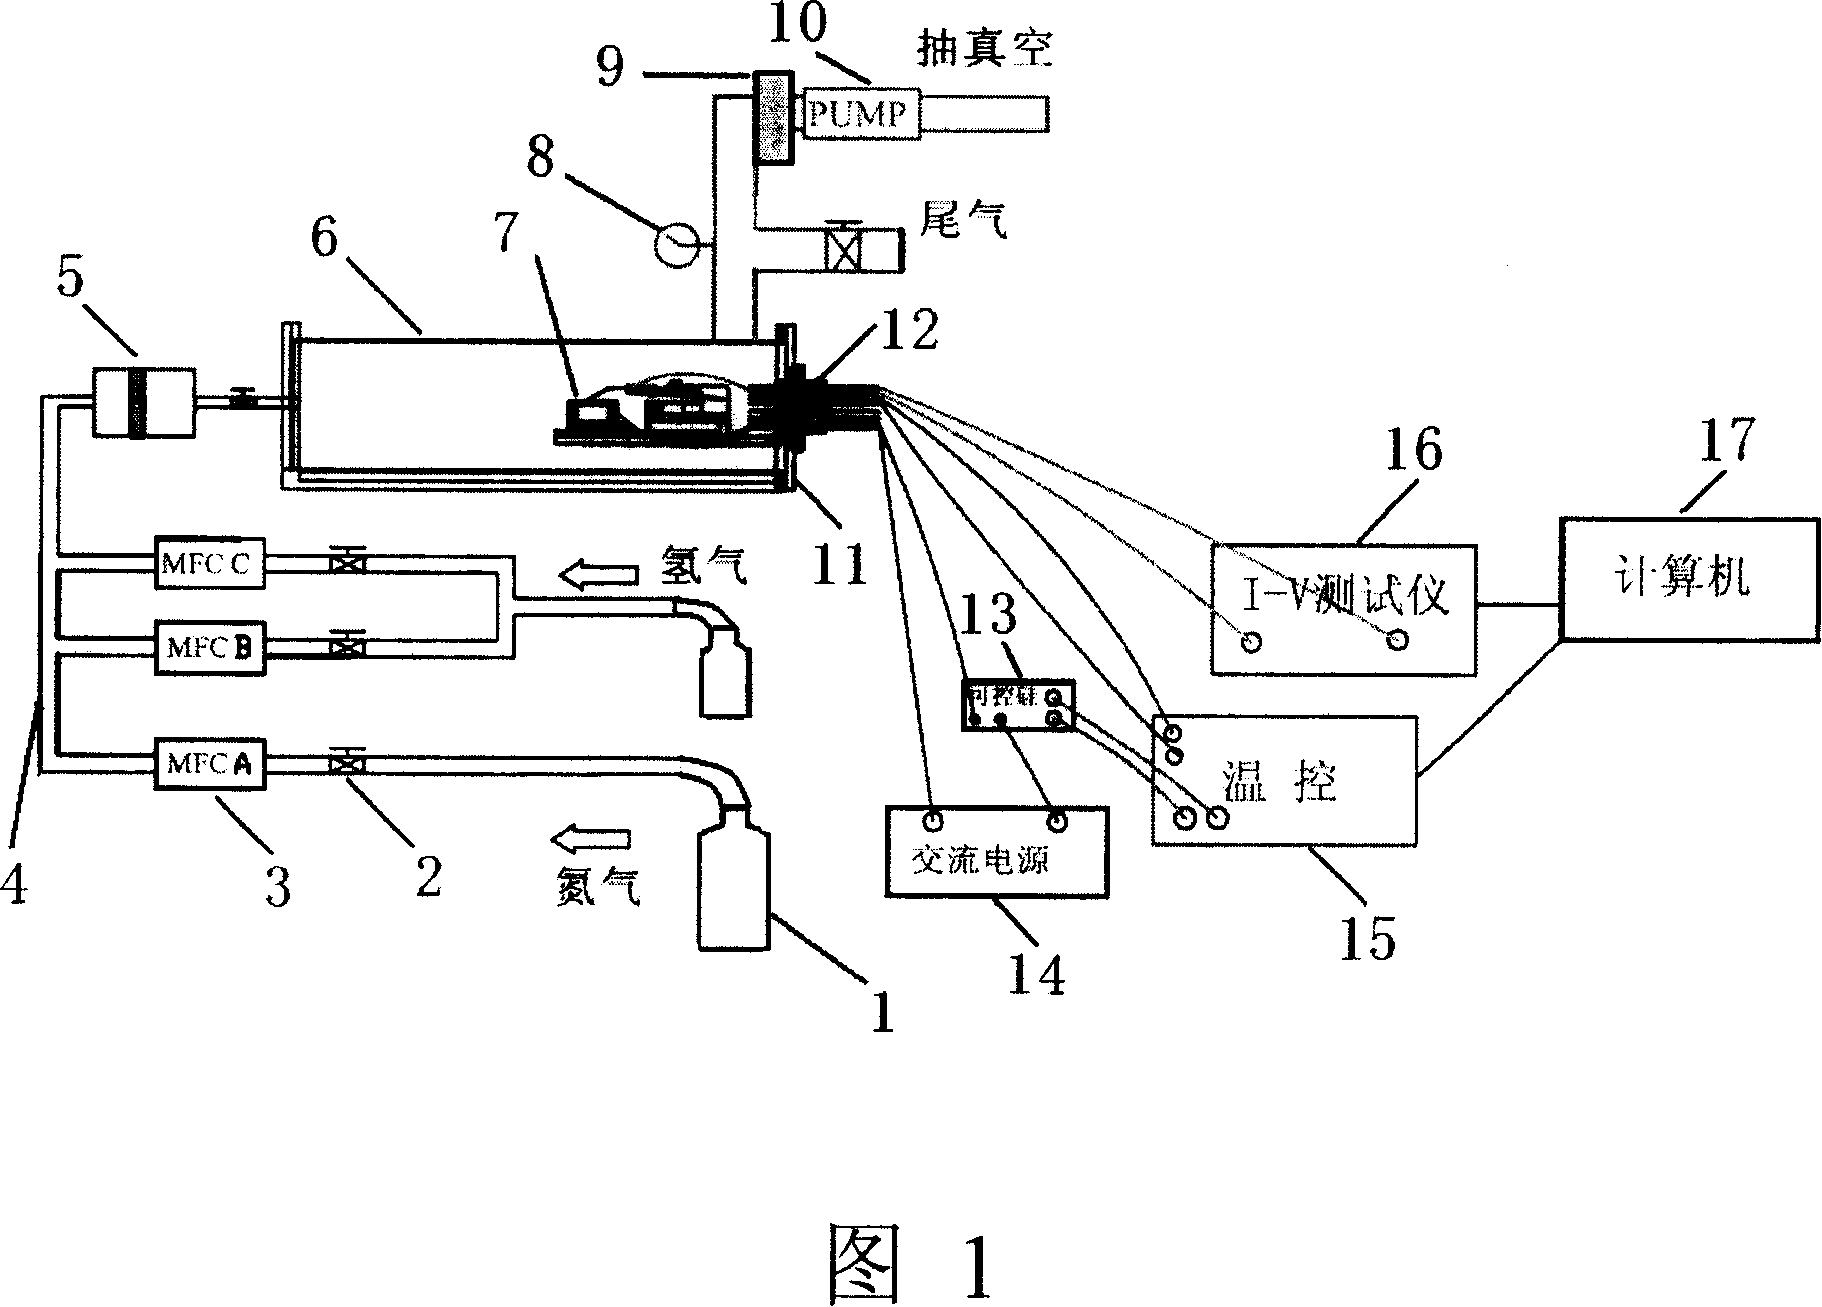 System for testing gas sensors or semiconductor device performance